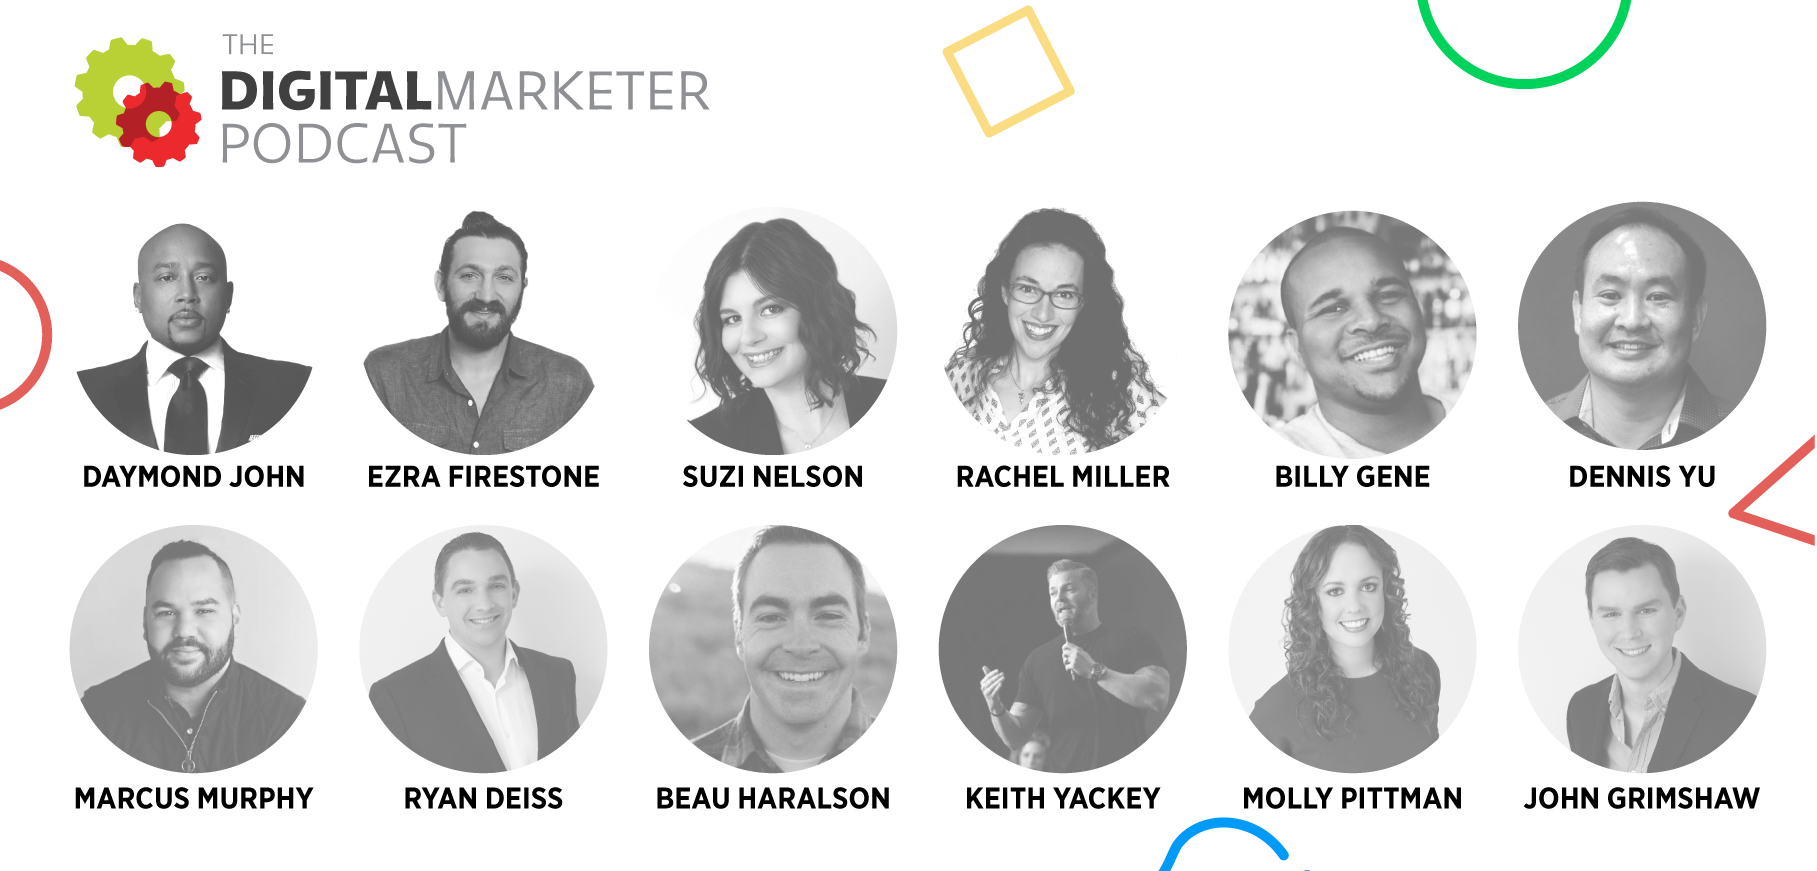 Guests of The DigitalMarketer Podcast